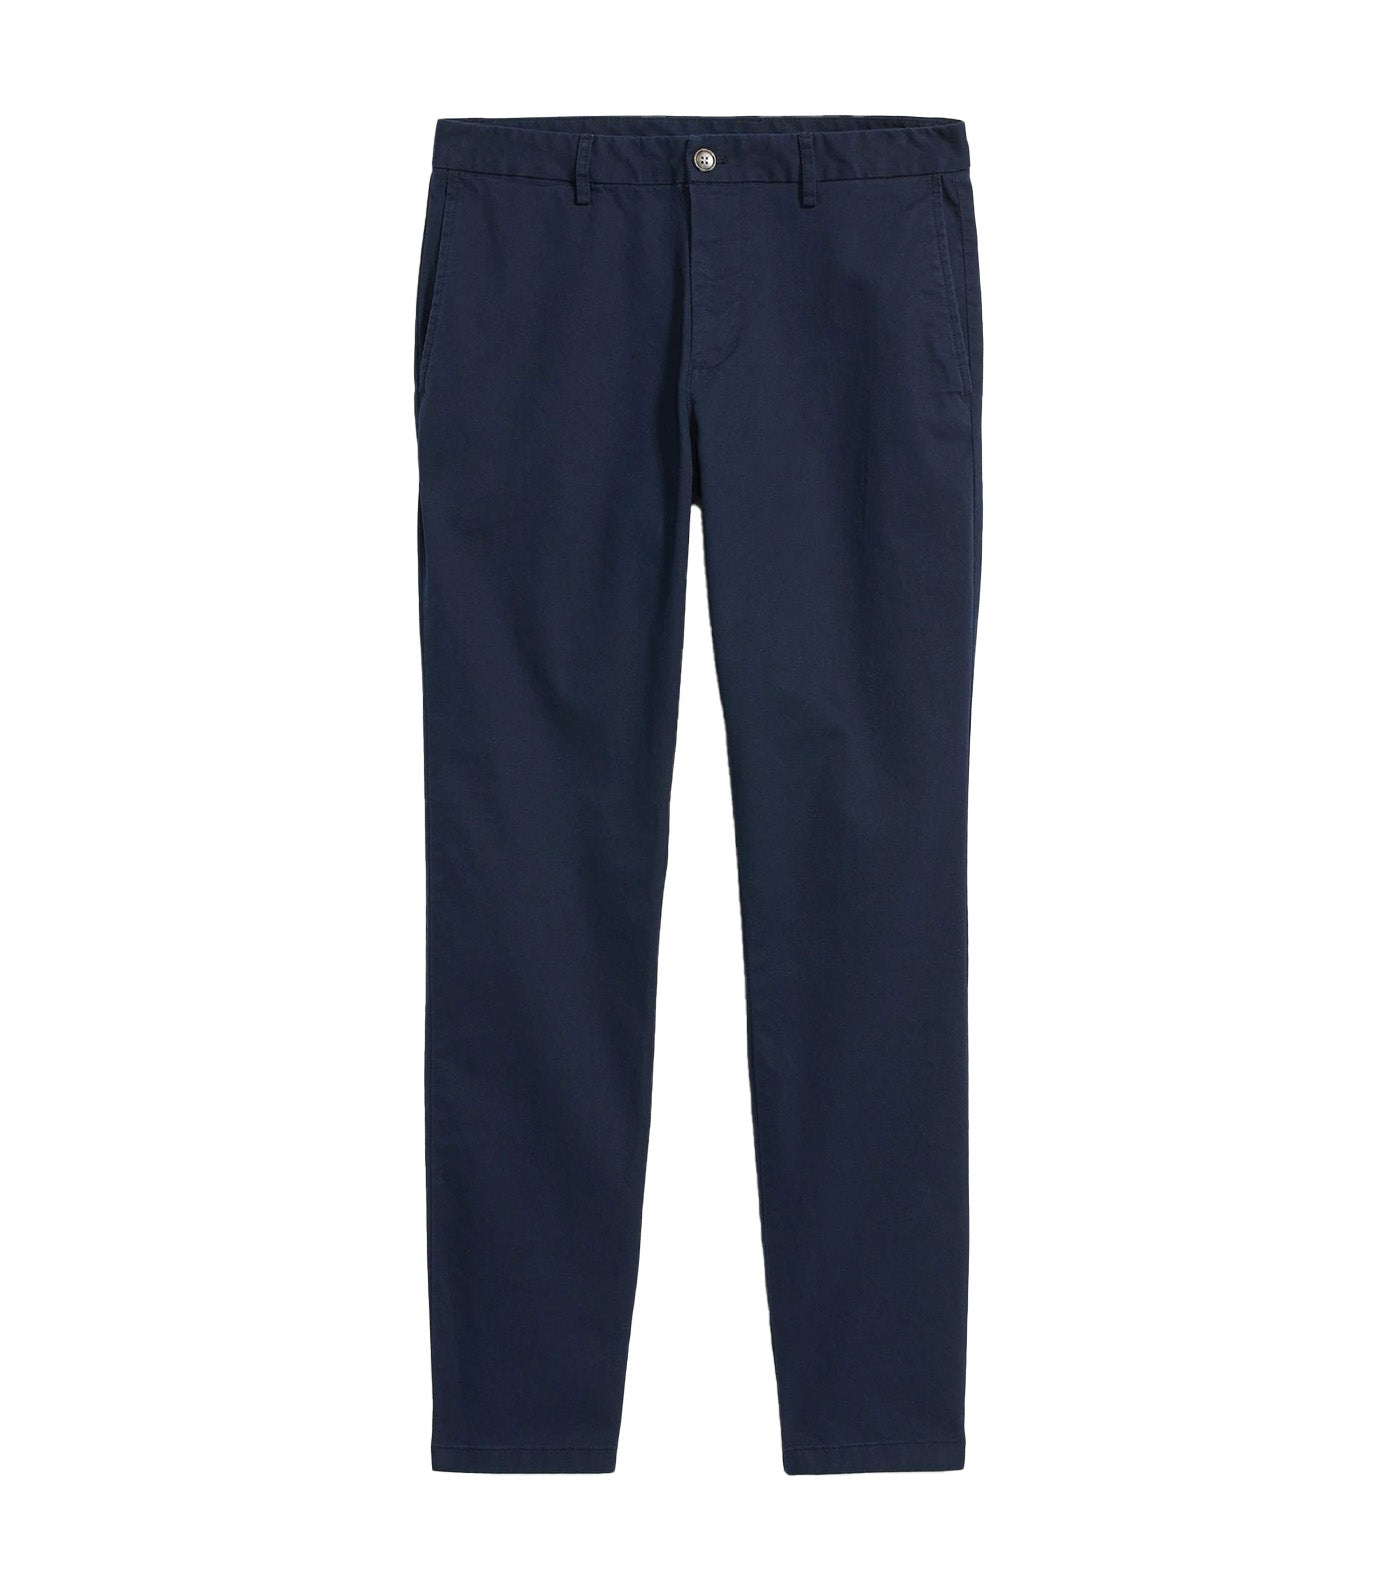 Slim Built-In Flex Rotation Chino Pants for Men In The Navy